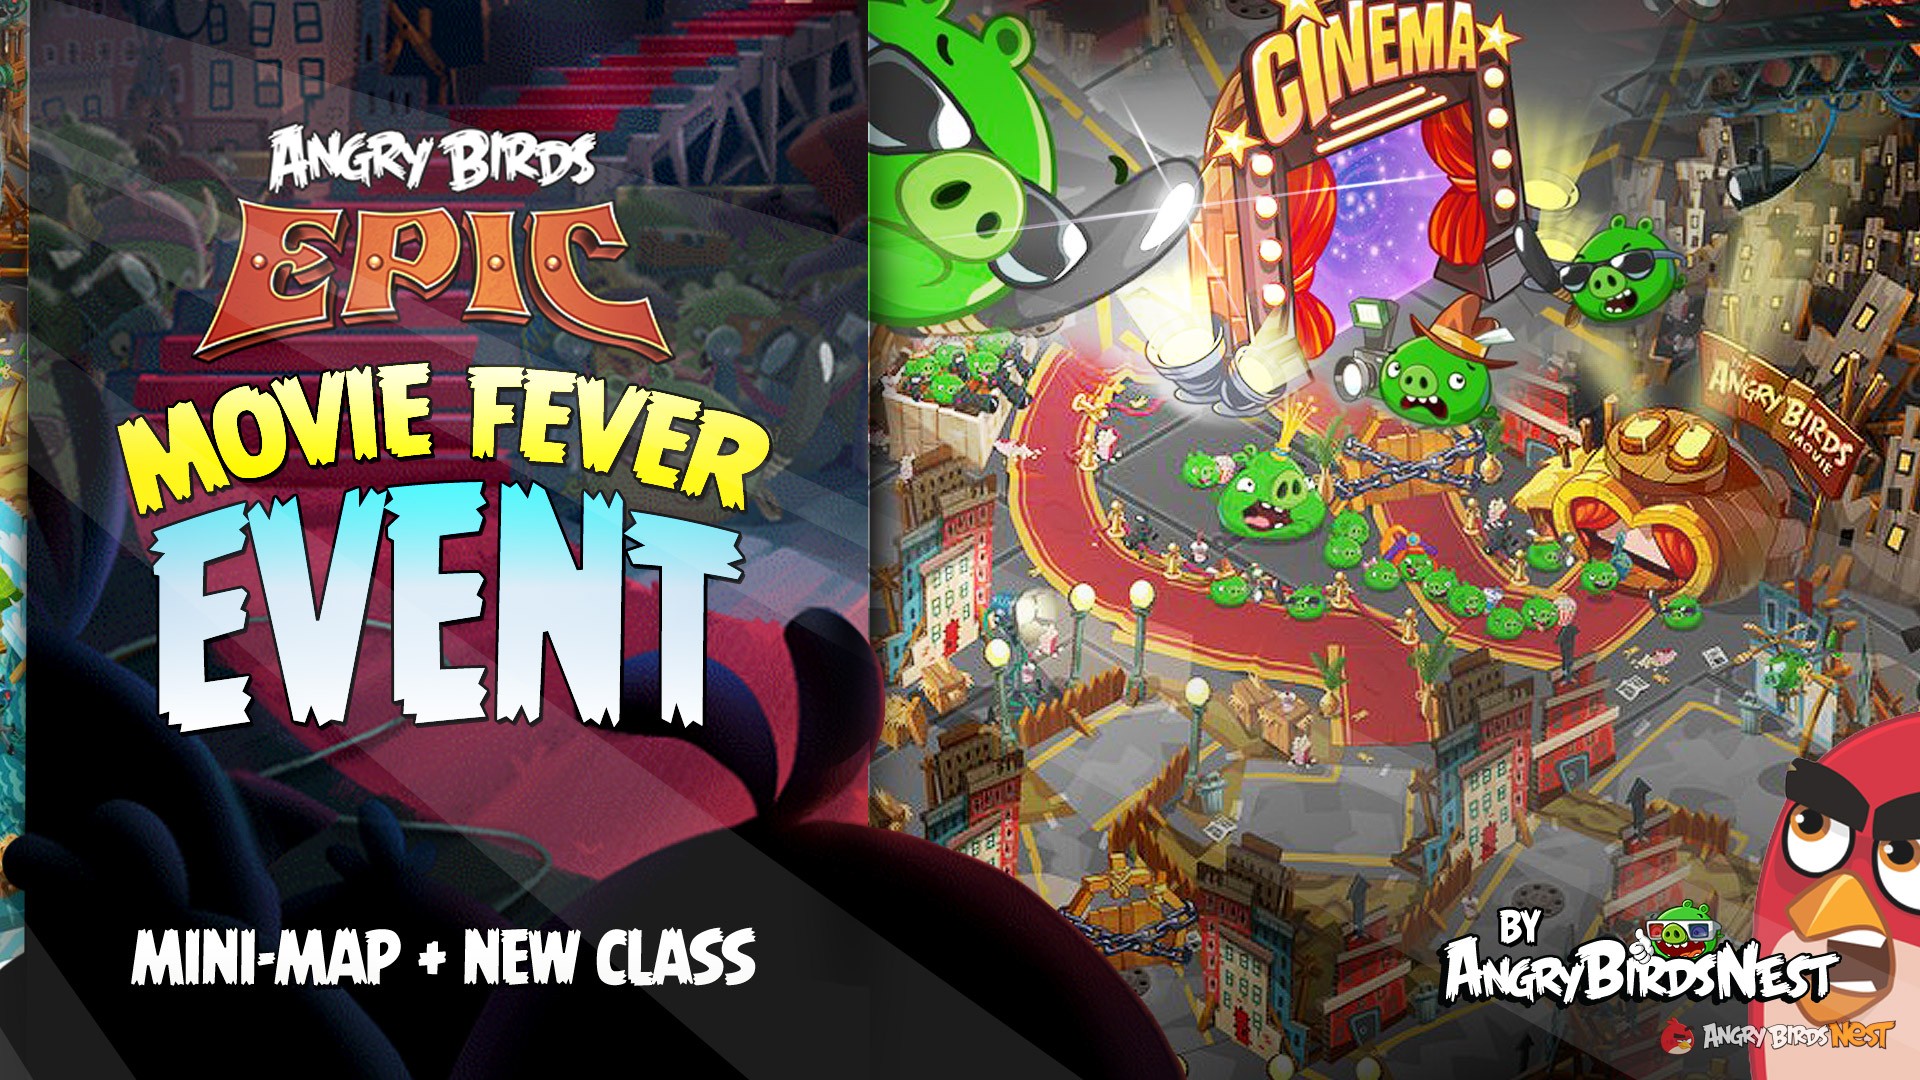 Angry Birds Epic Special Movie Fever Mini-Map Event - 1920x1080